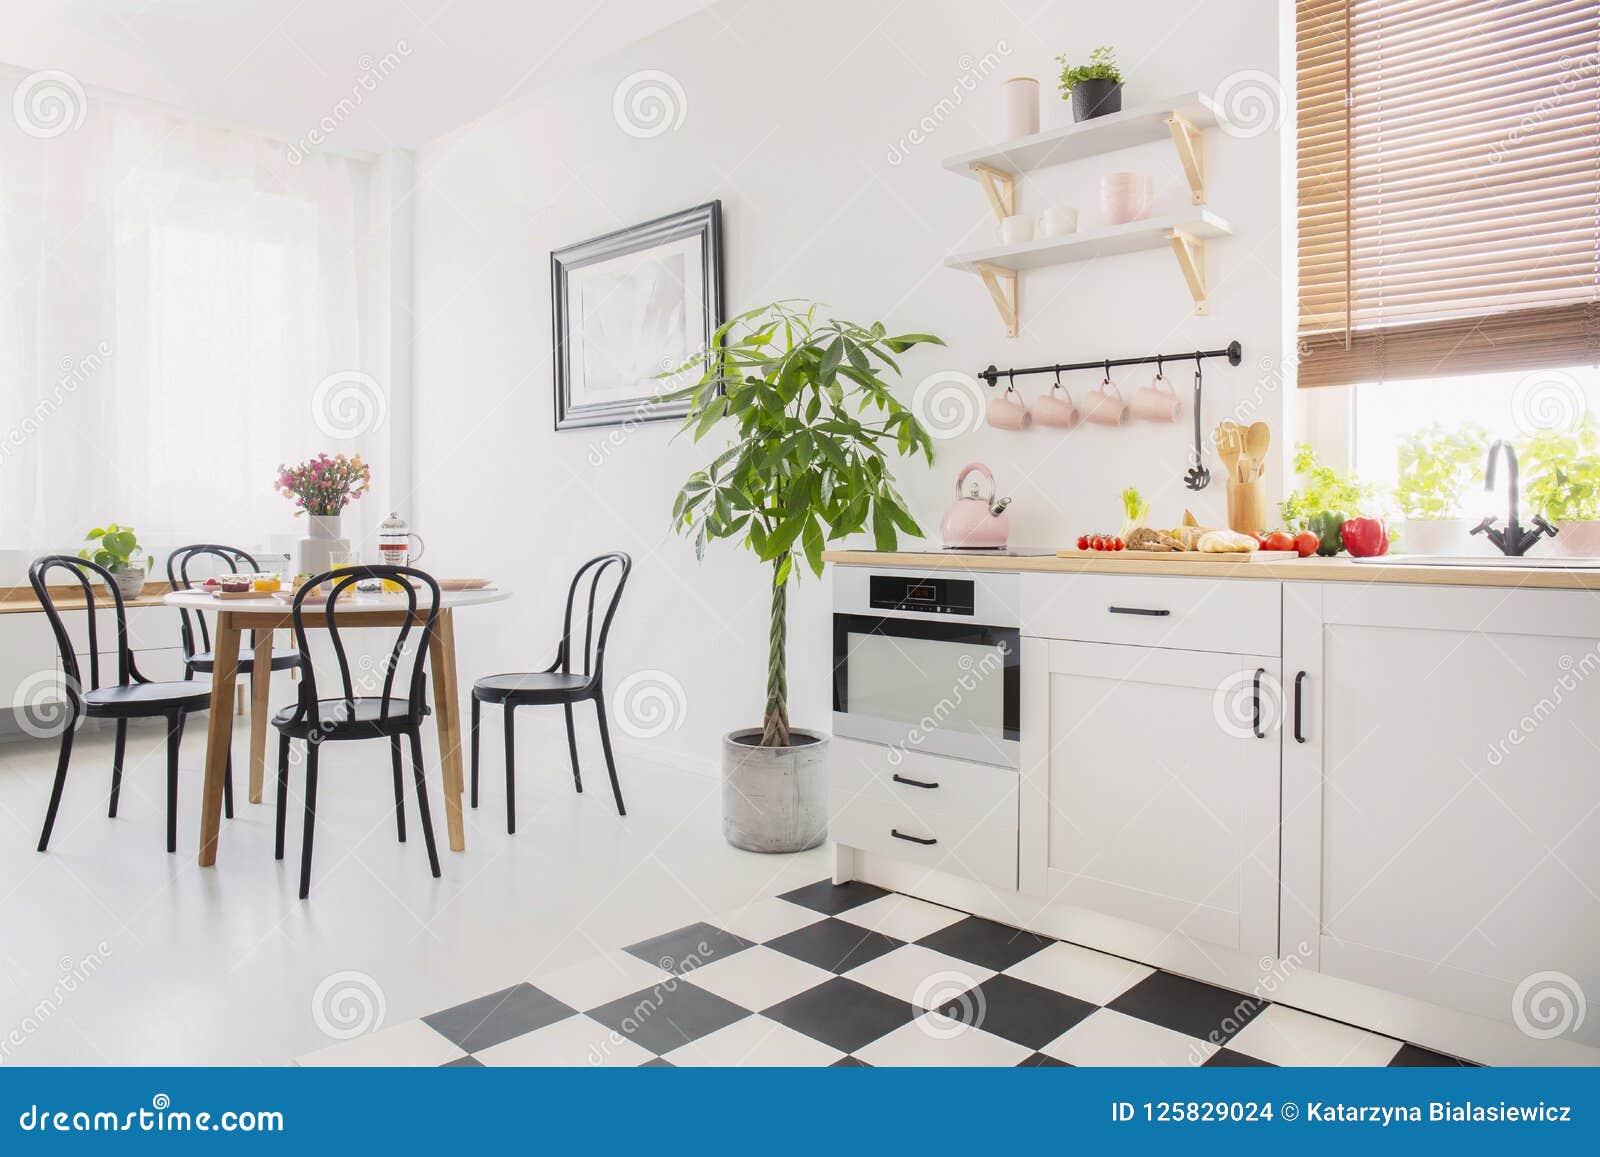 black chairs at dining table with flowers in white flat interior with plant next to kitchenette. real photo